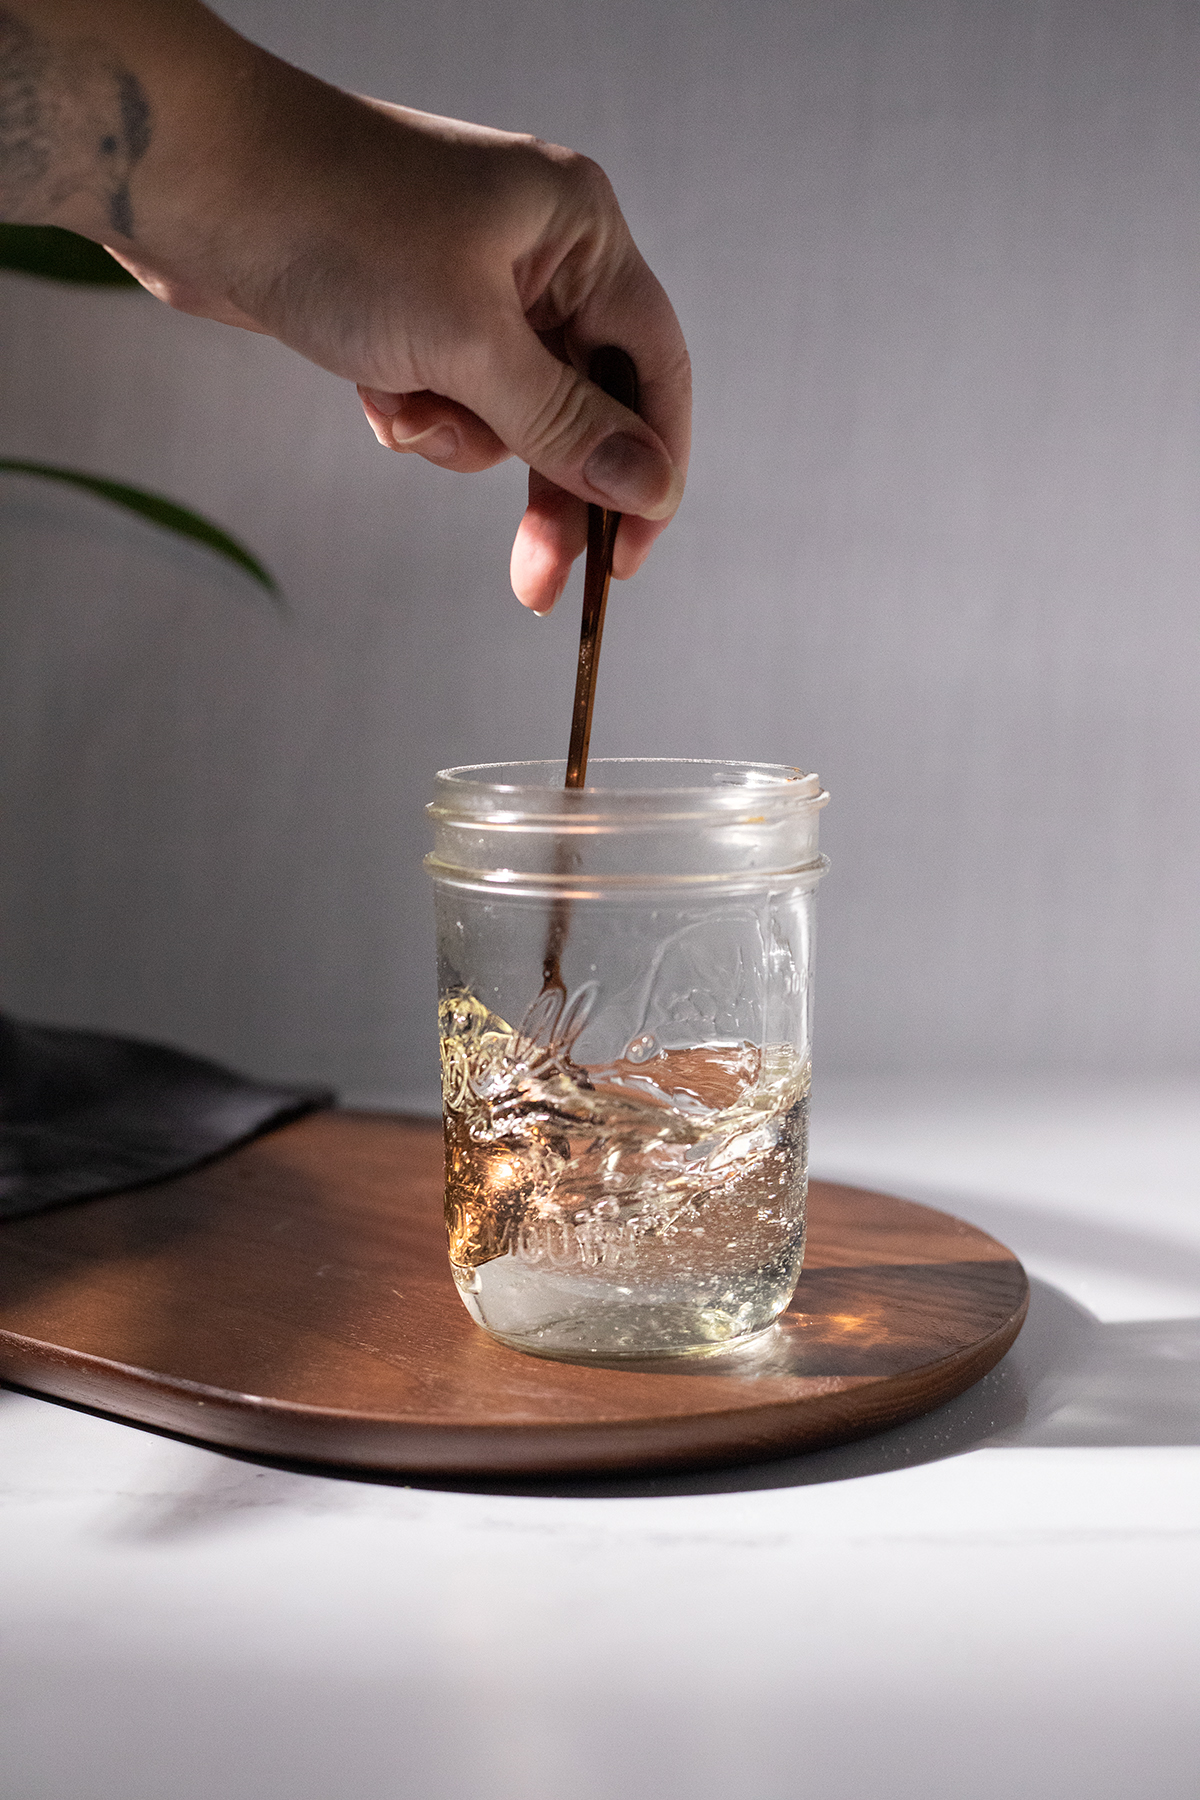 https://www.moodymixologist.com/wp-content/uploads/2022/10/stirring-simple-syrup-with-a-bronze-spoon-in-a-glass-jar.jpg